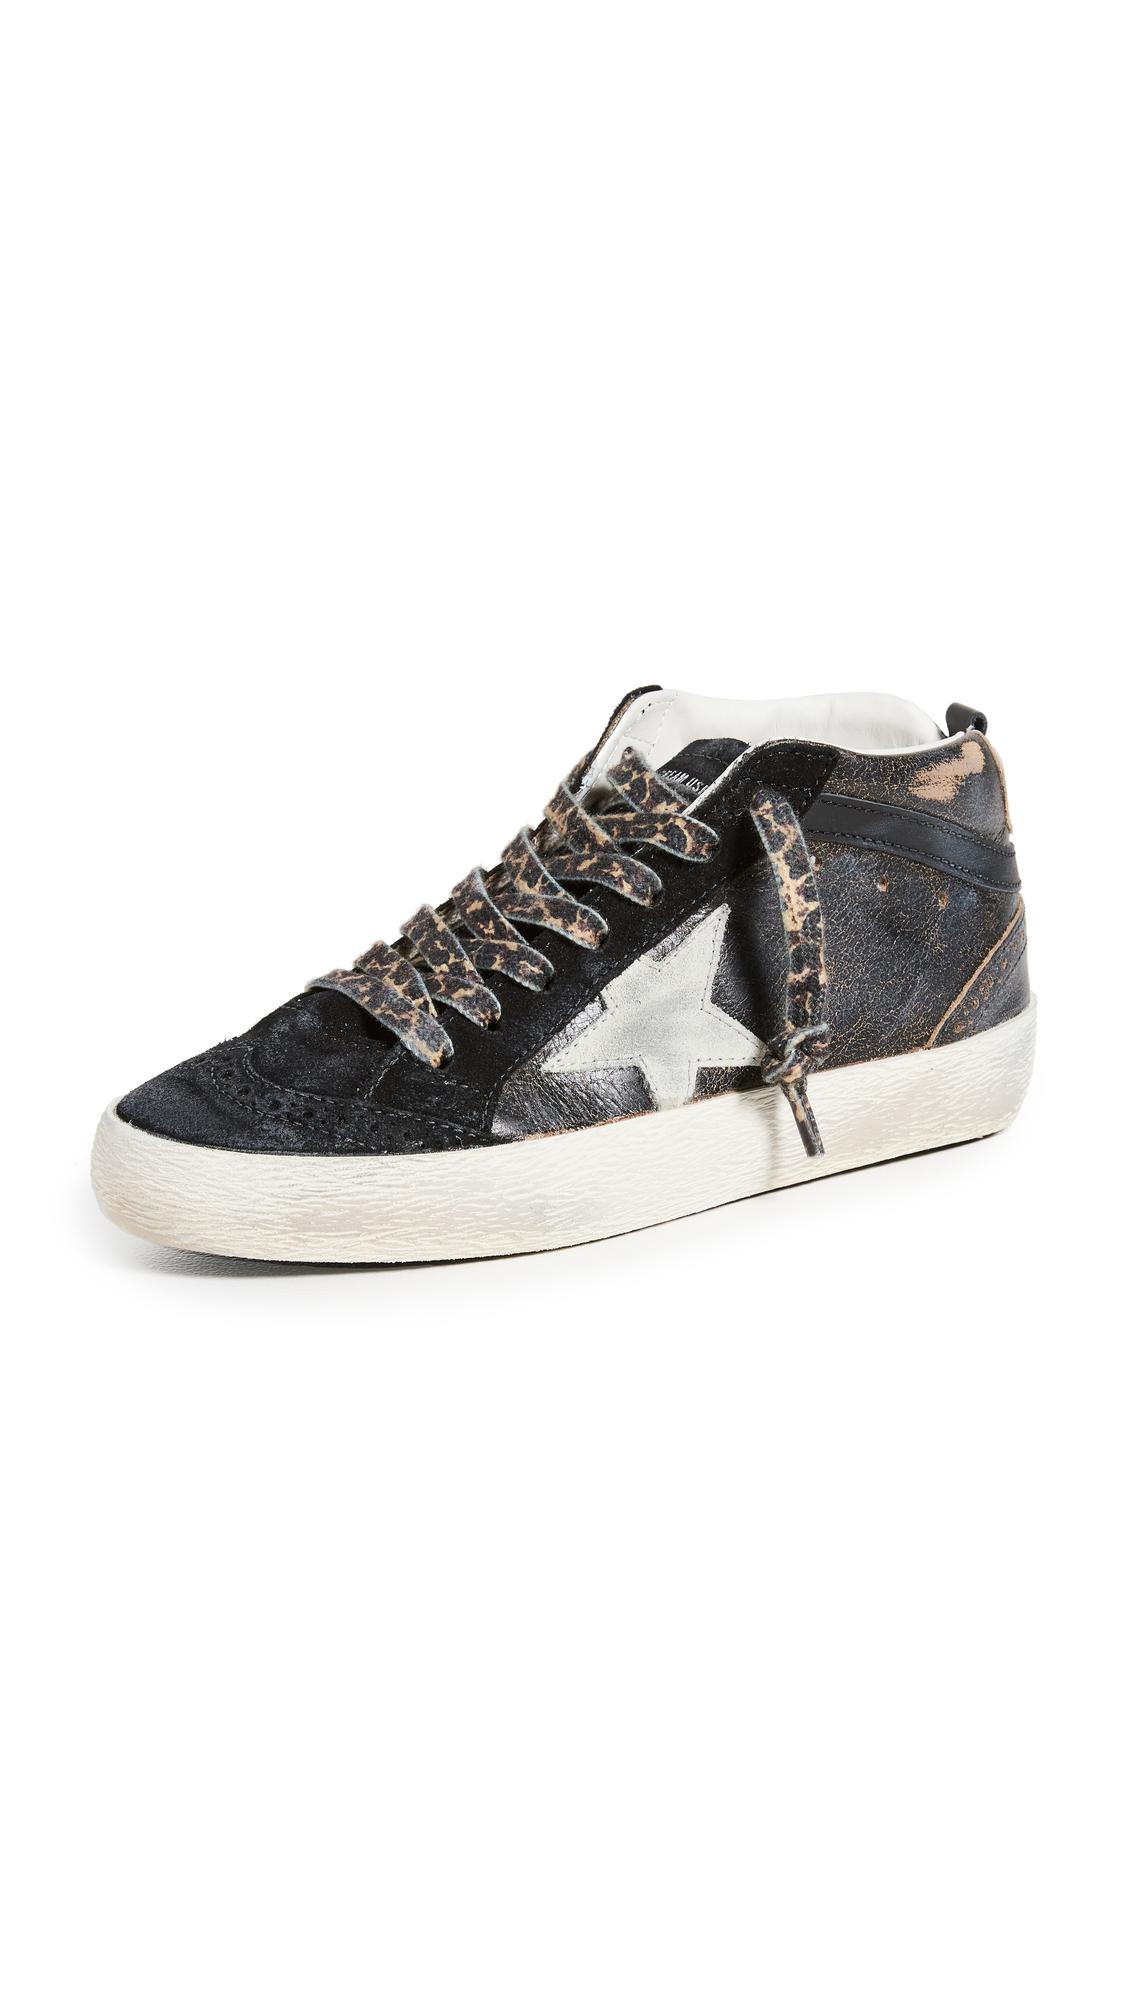 Golden Goose Mid Star Shiny Leather Upper And Spur Suede Sneakers | Lyst